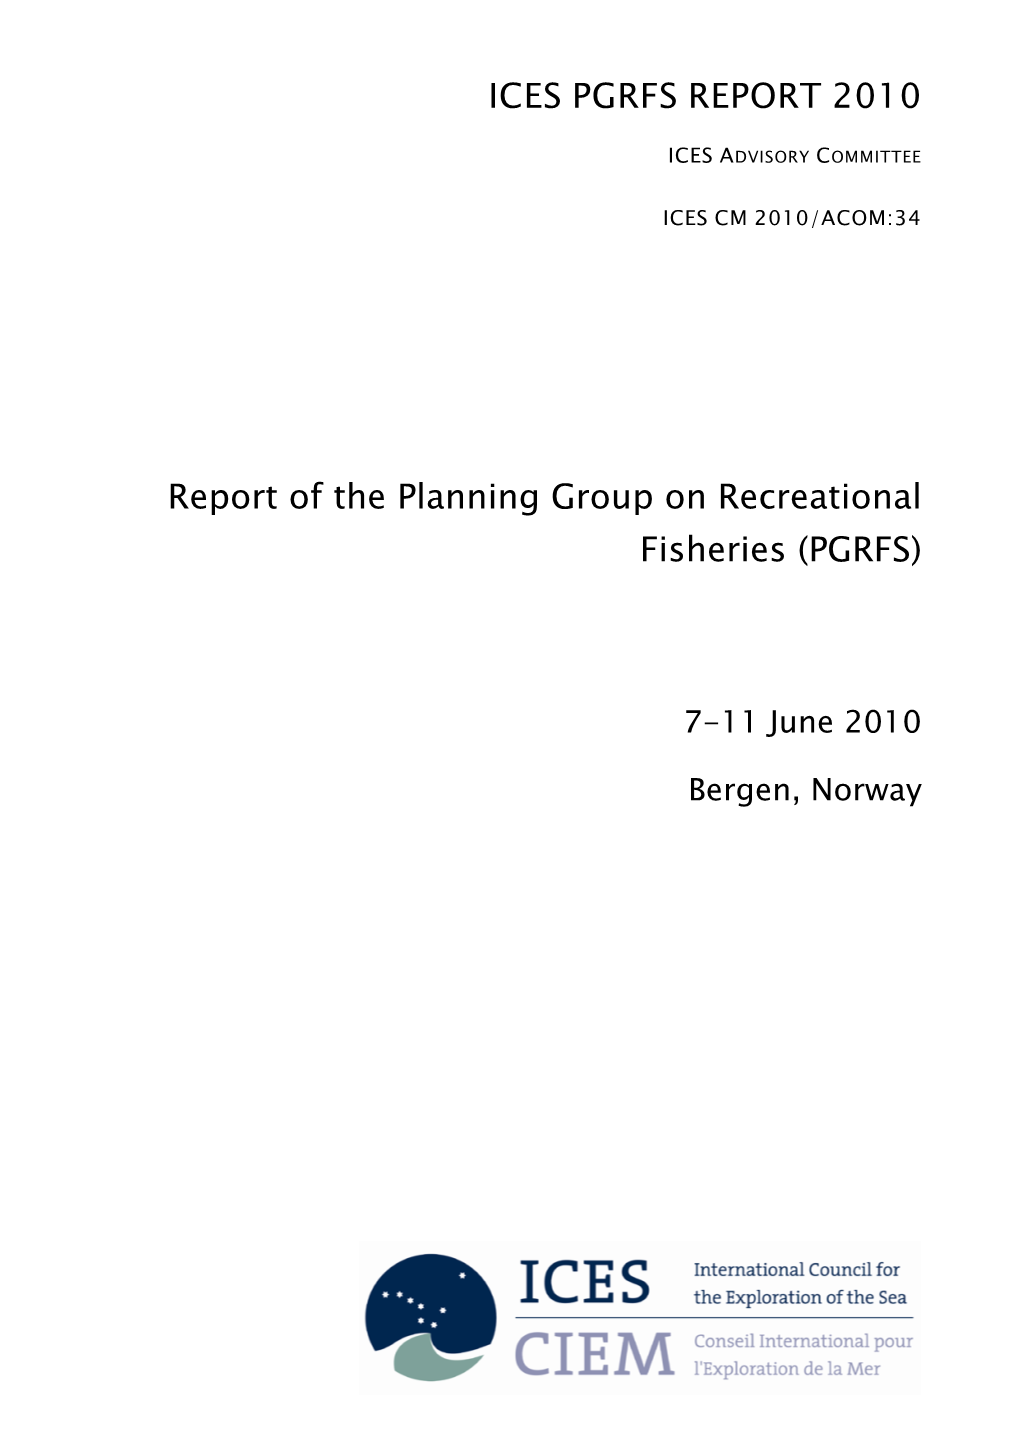 Report of the Planning Group on Recreational Fisheries (PGRFS), 7-11 June 2010, Bergen, Norway